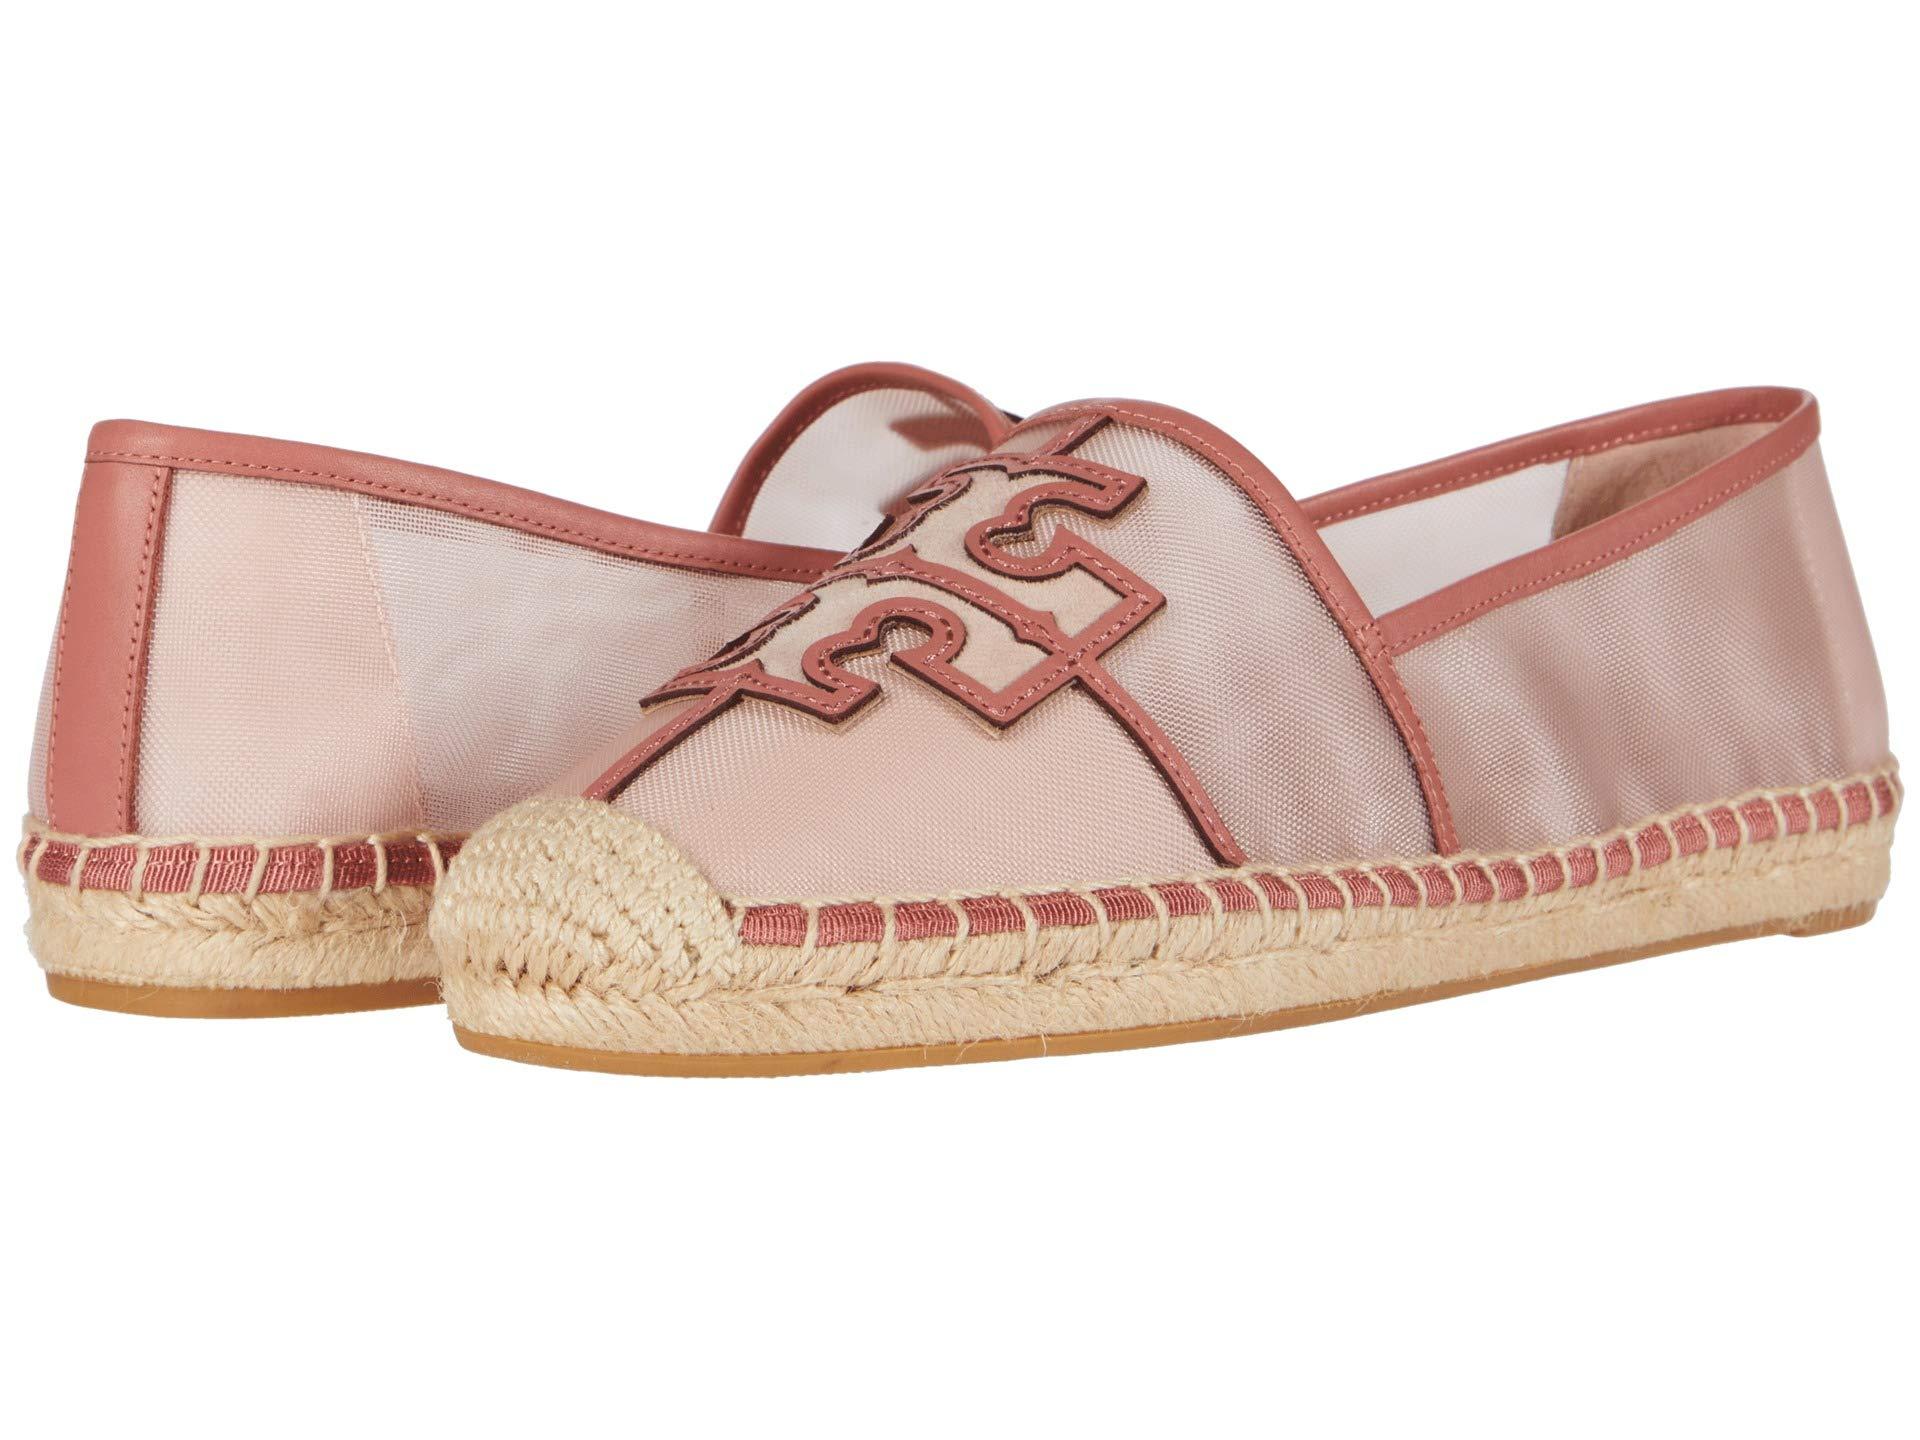 Tory Burch Ines Flat Mesh Sandals in Pink